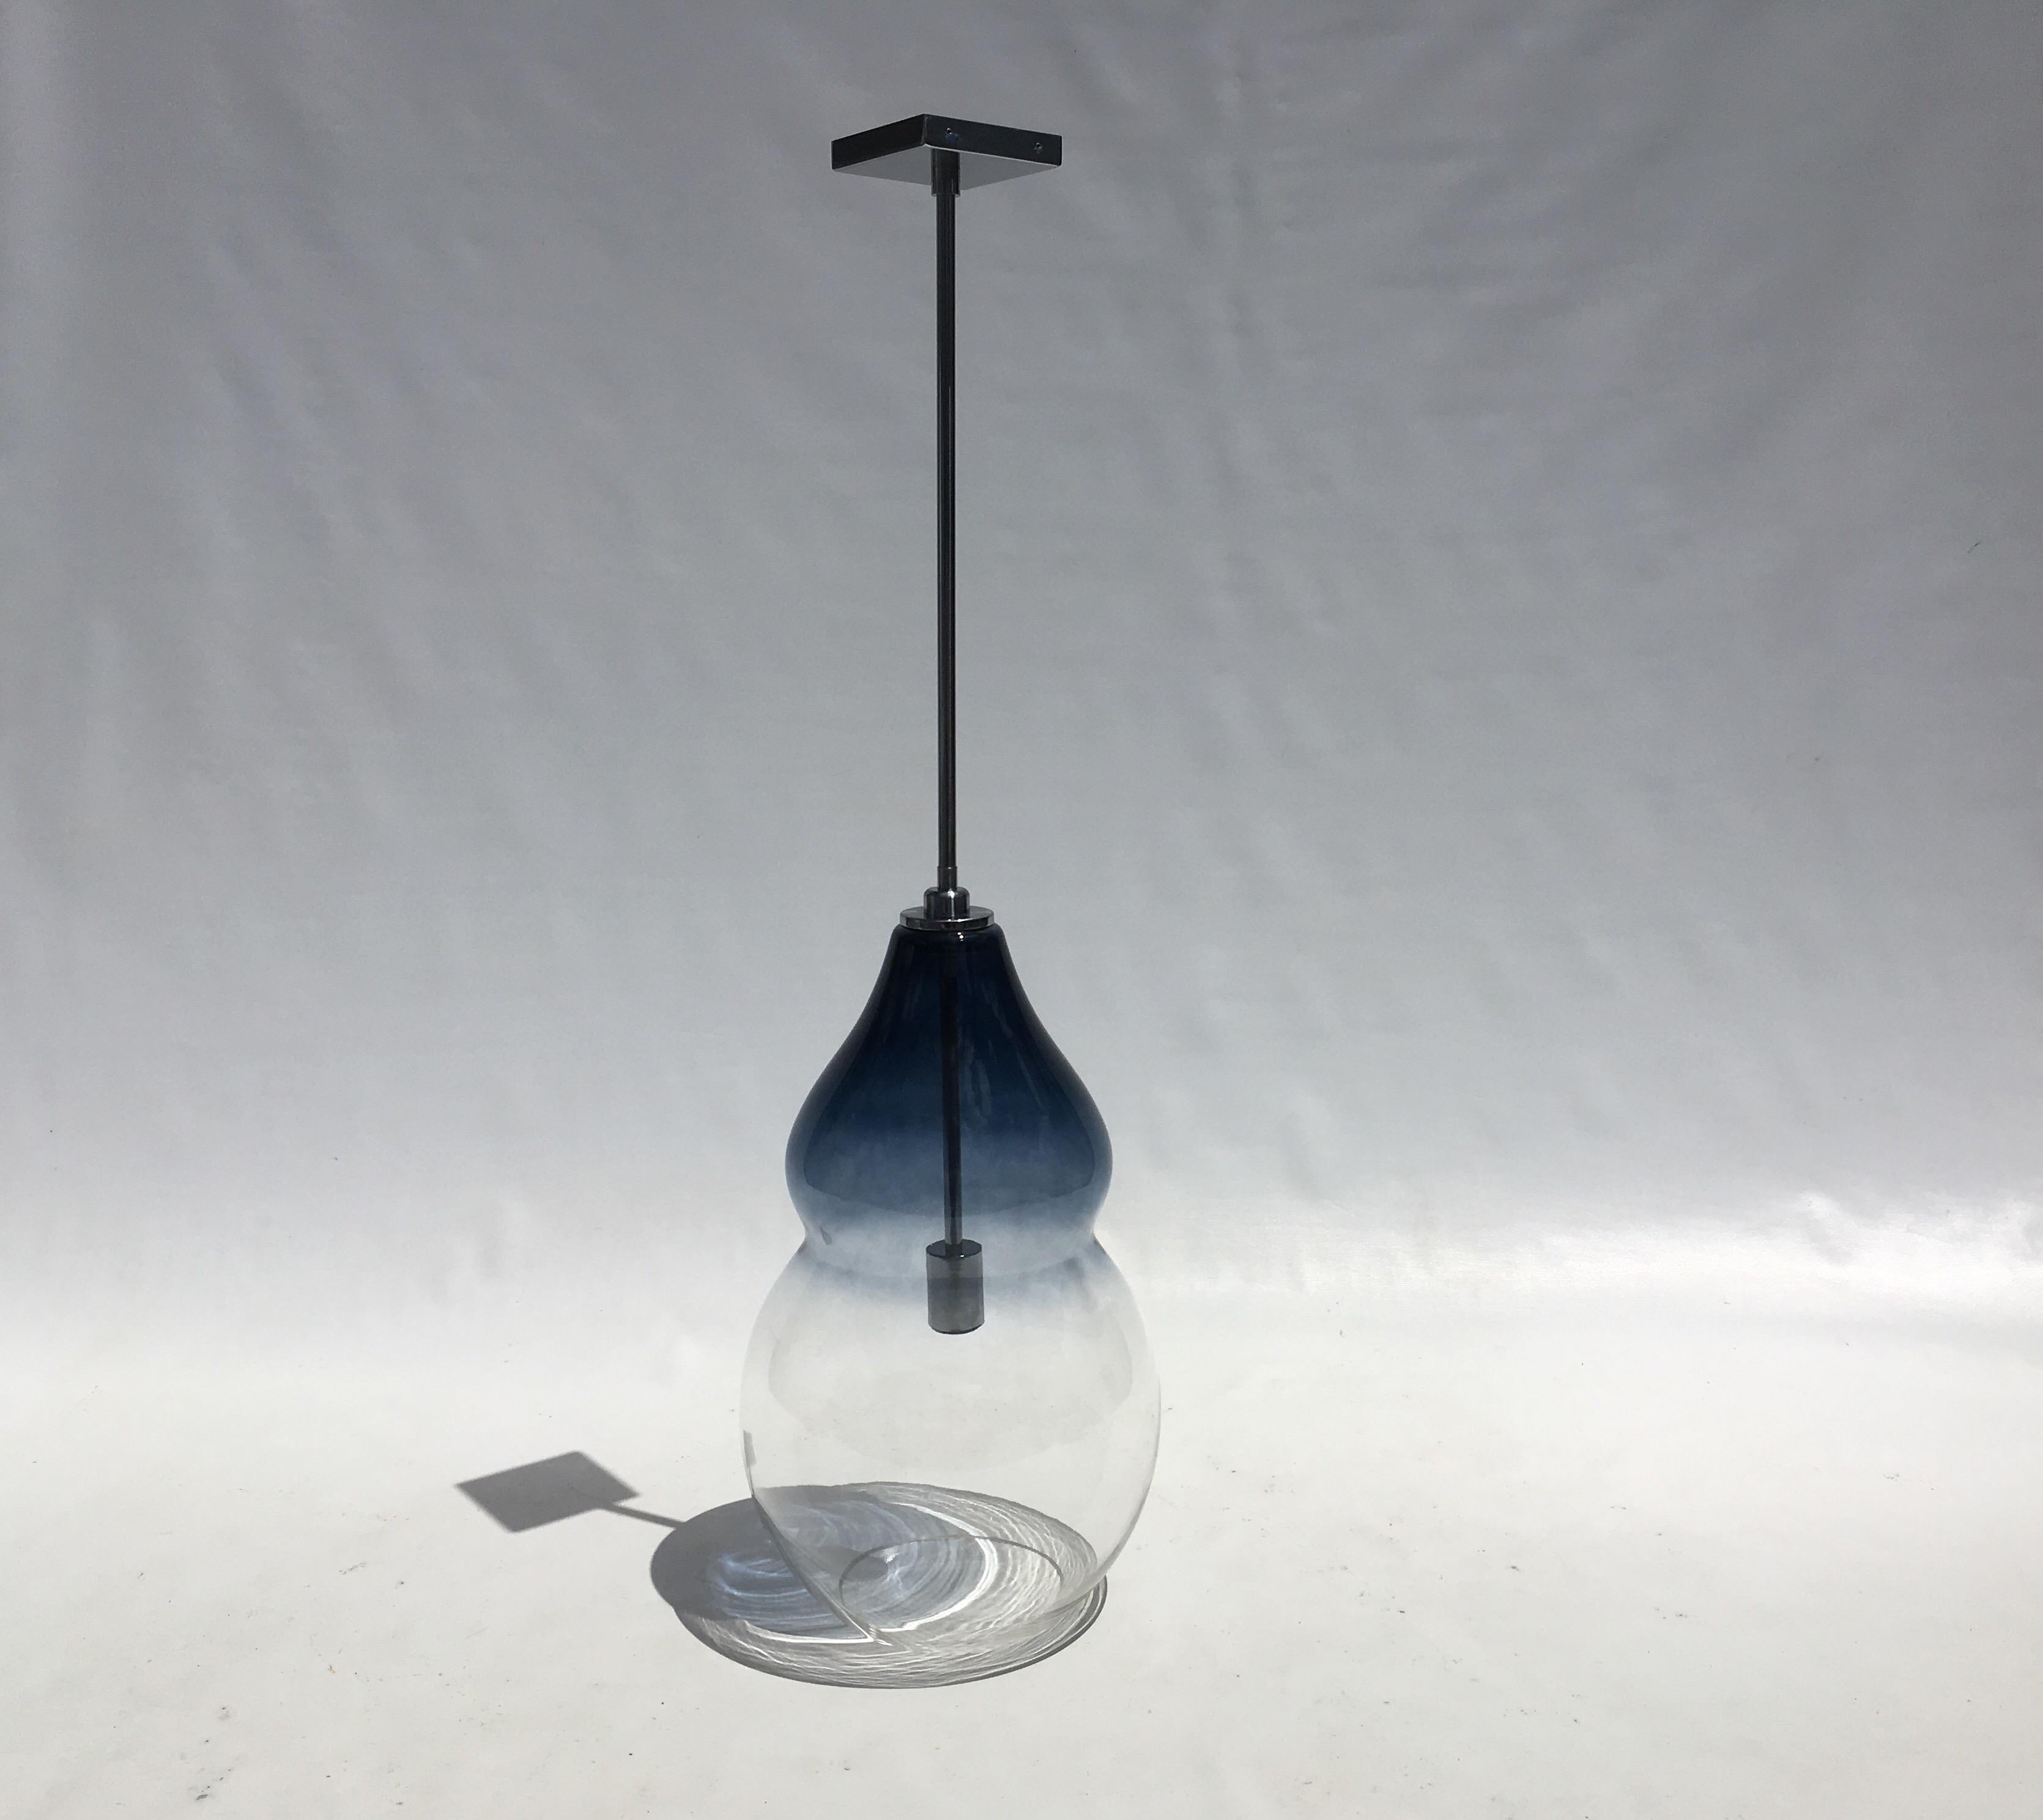 Blue and clear glass pendant with satin chrome stem. Glass body is 20